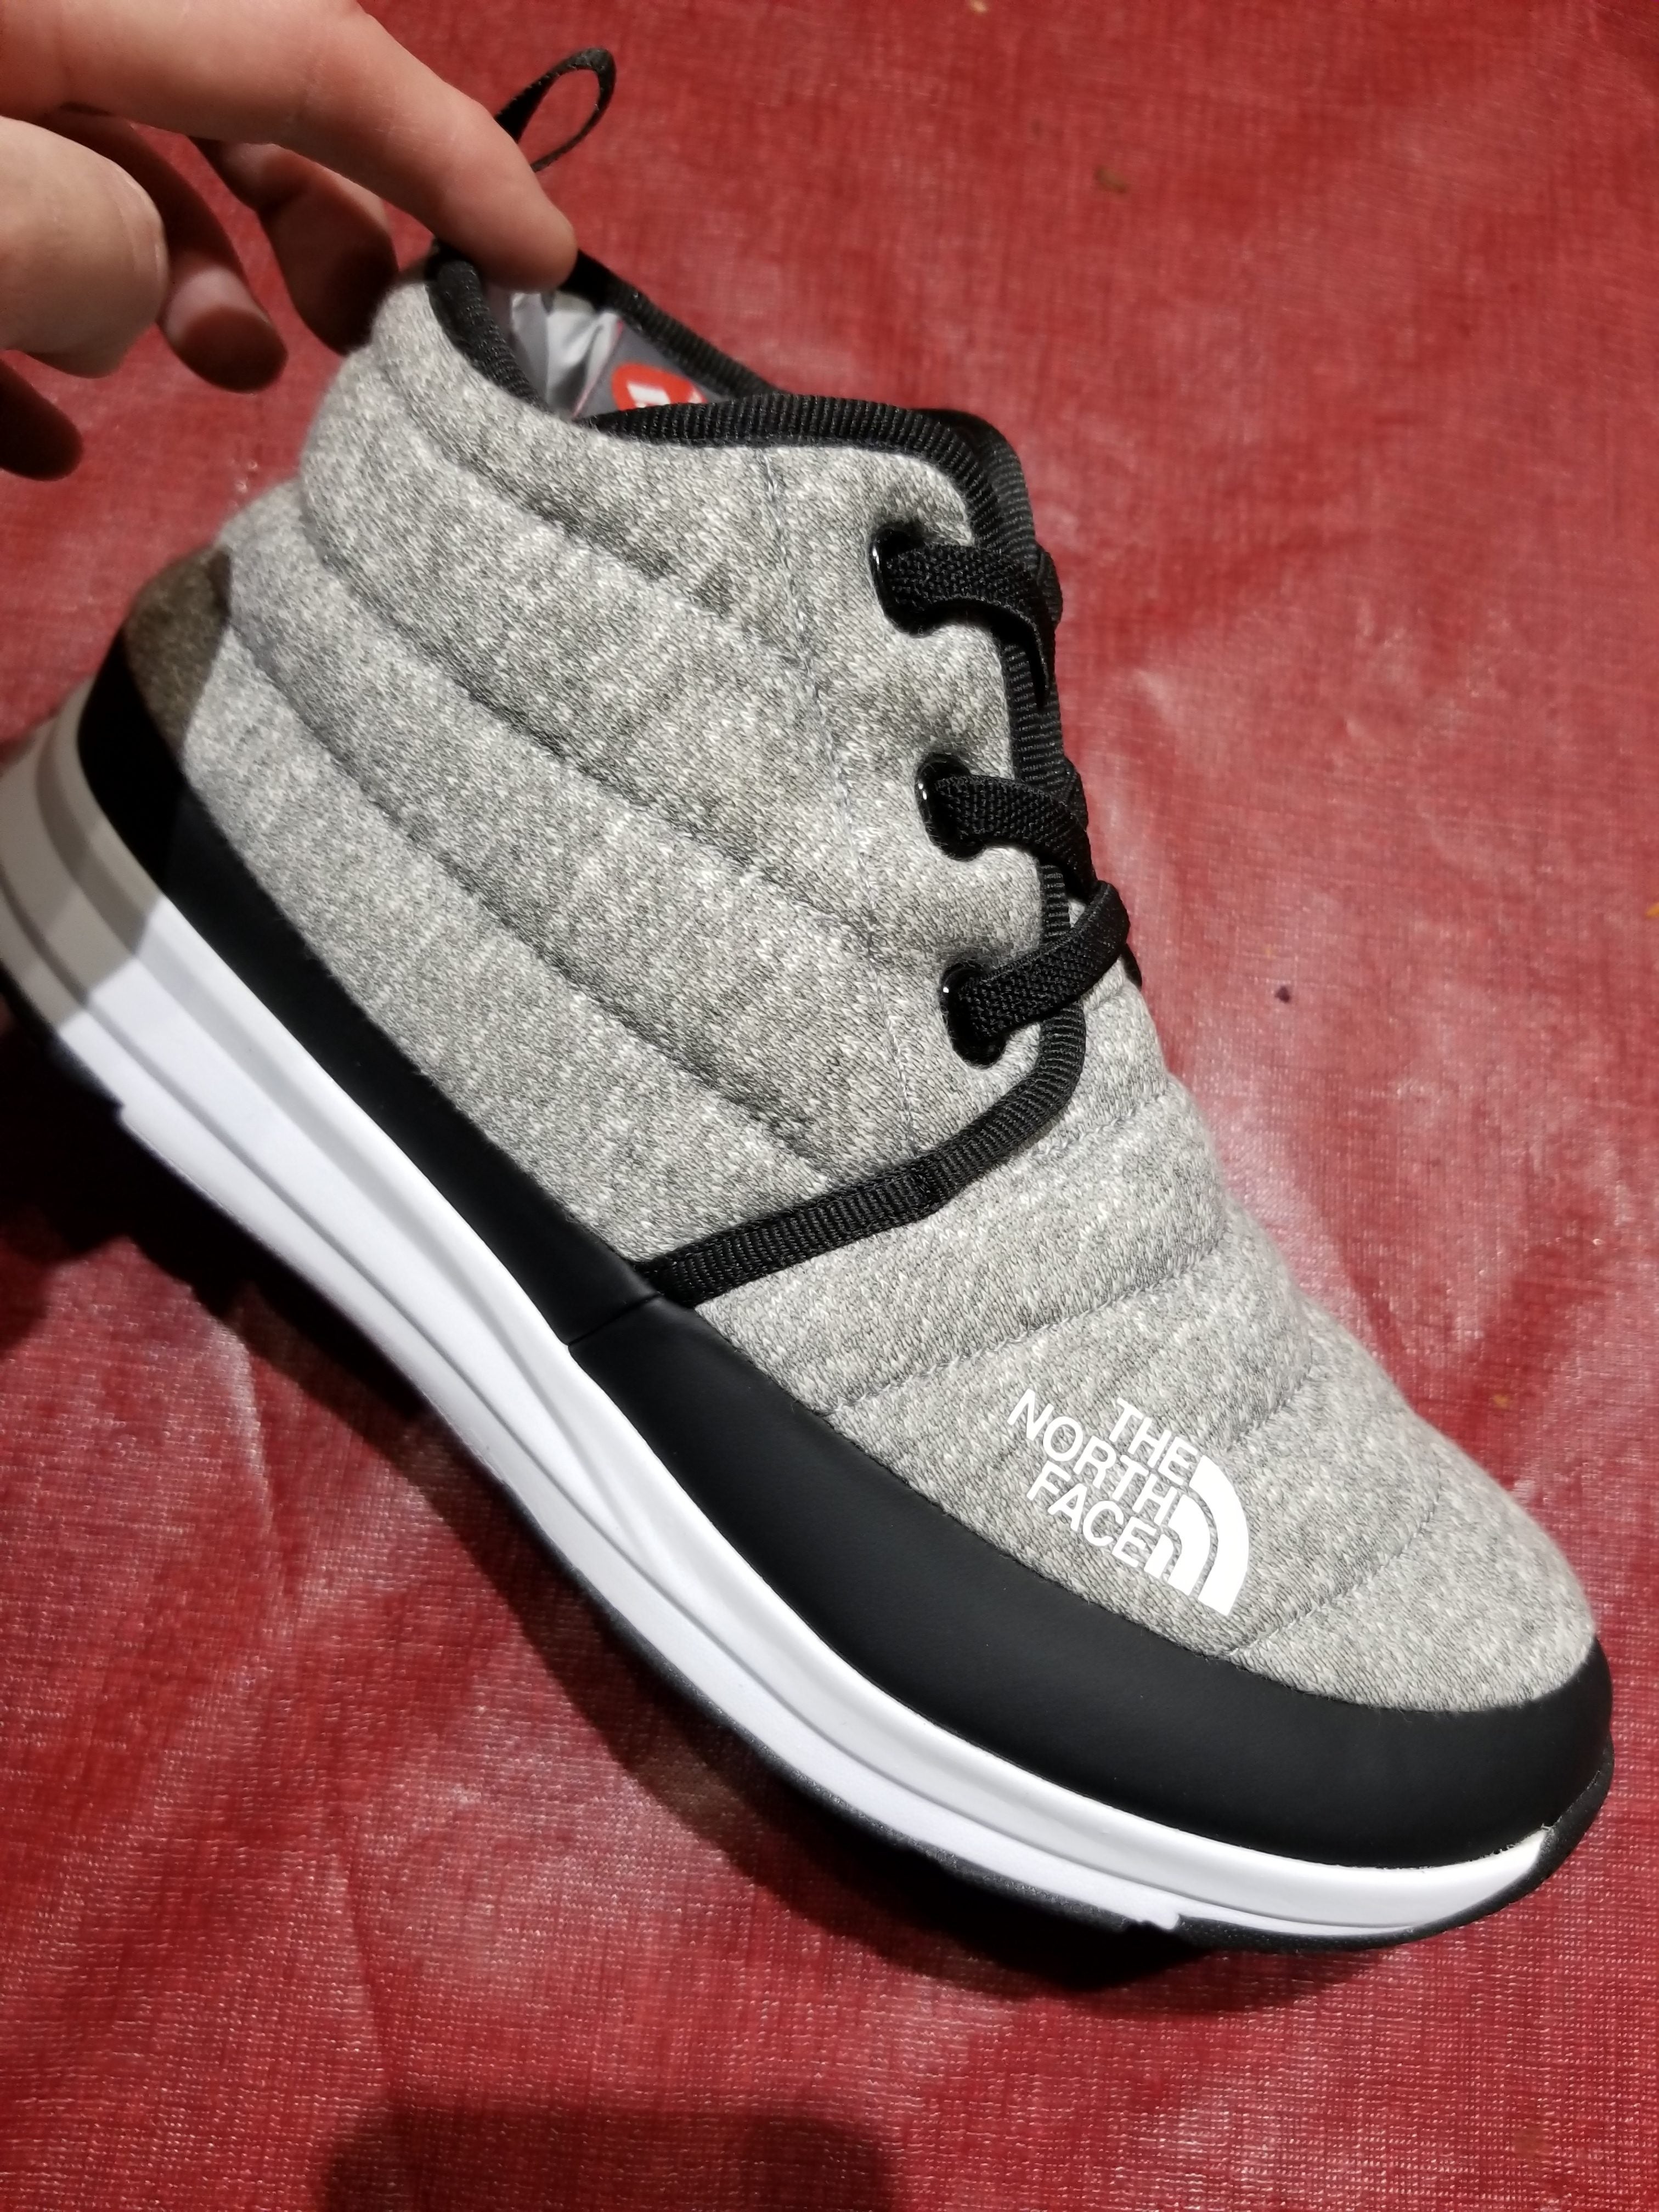 north face nse traction chukka lite ii